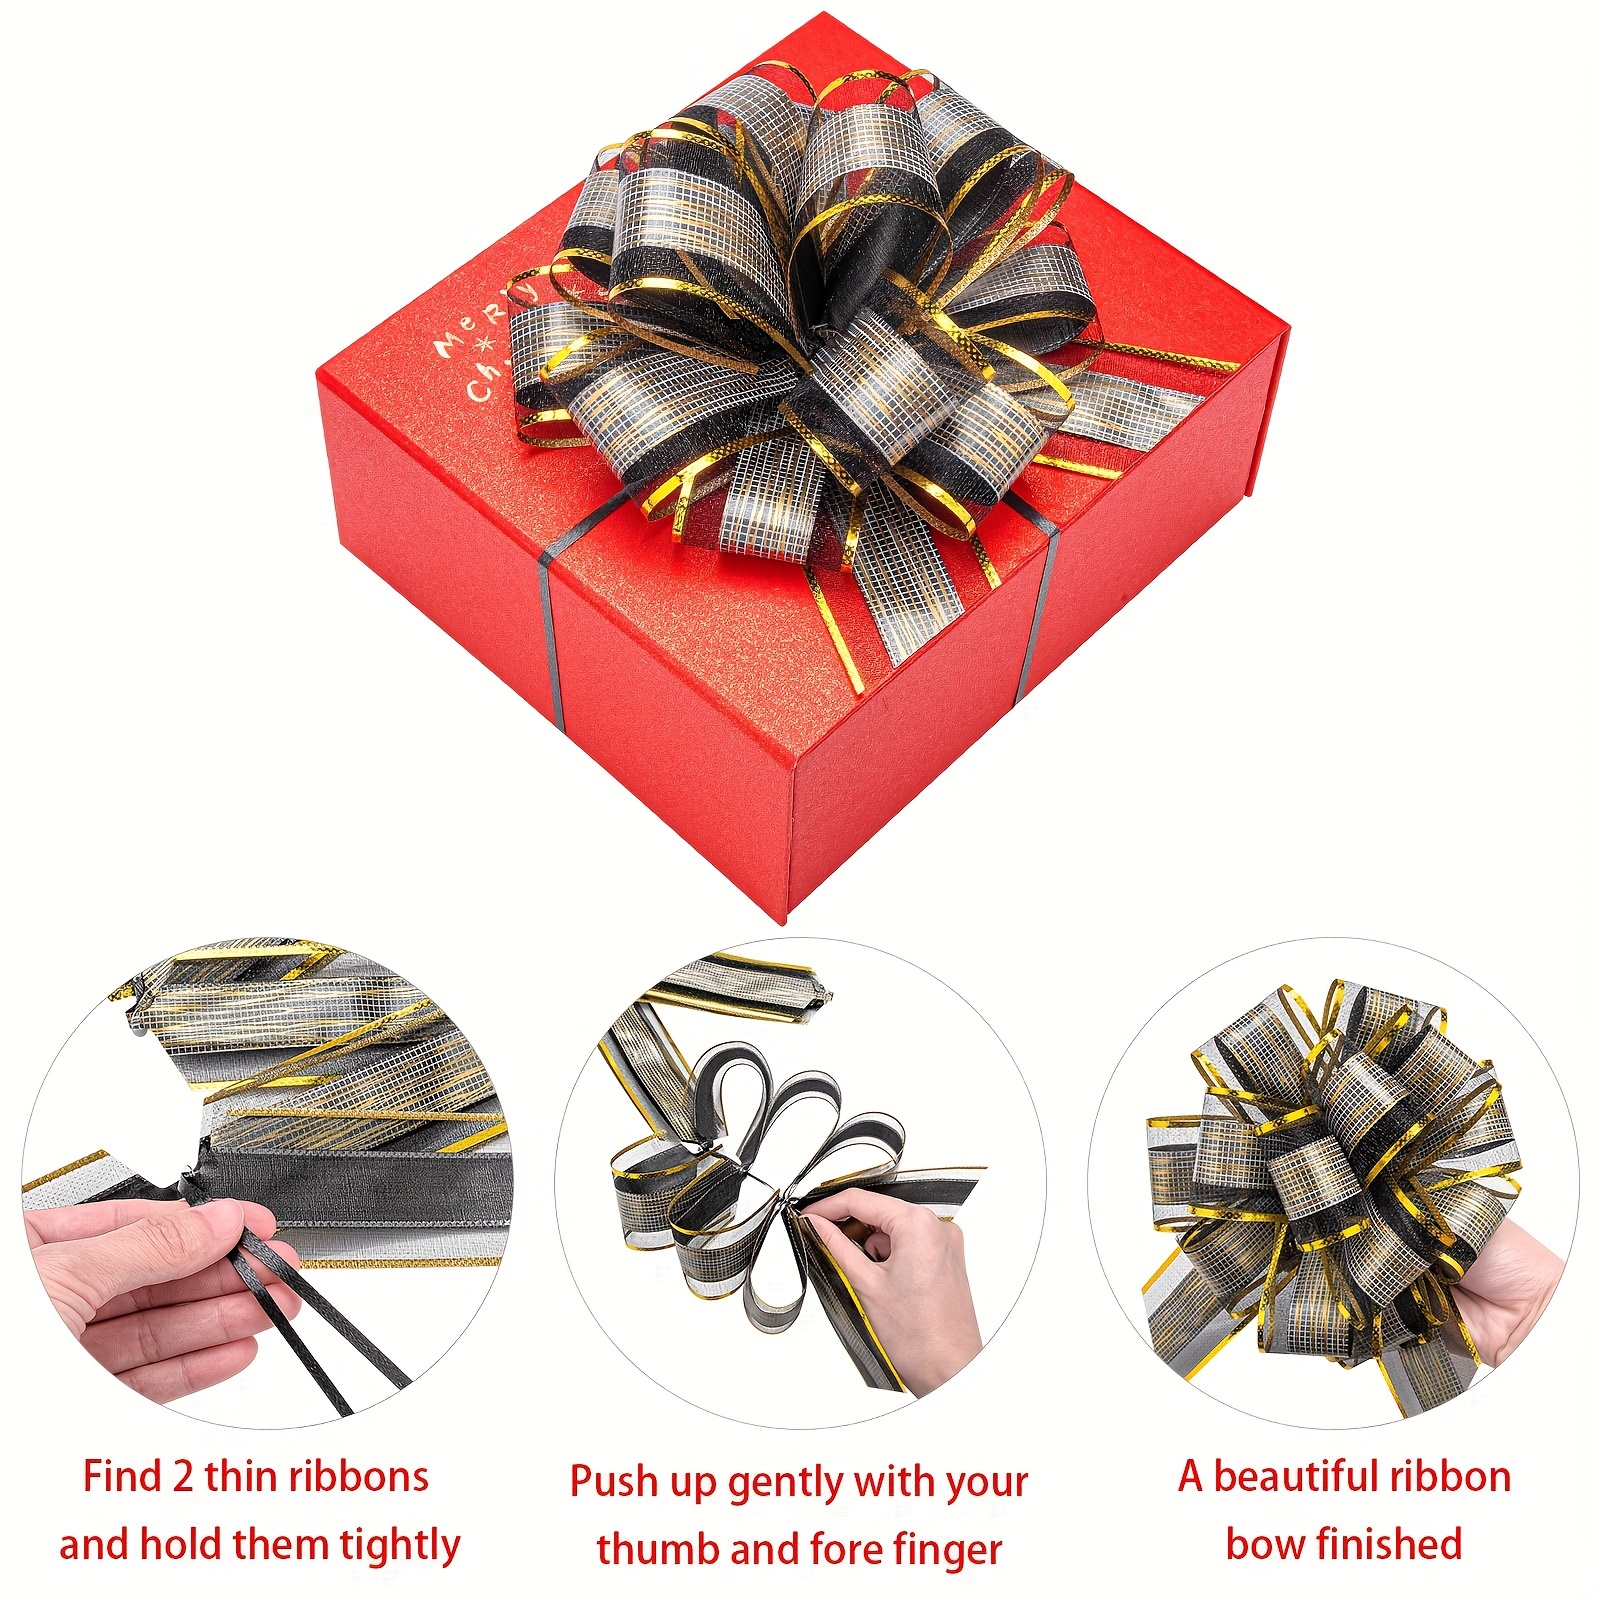 12 PCS 6 Large Gift Ribbon Pull Bows, Gift Wrapping Bows for Baskets,  Presents, Wedding, Christmas, Party Decorations,Red